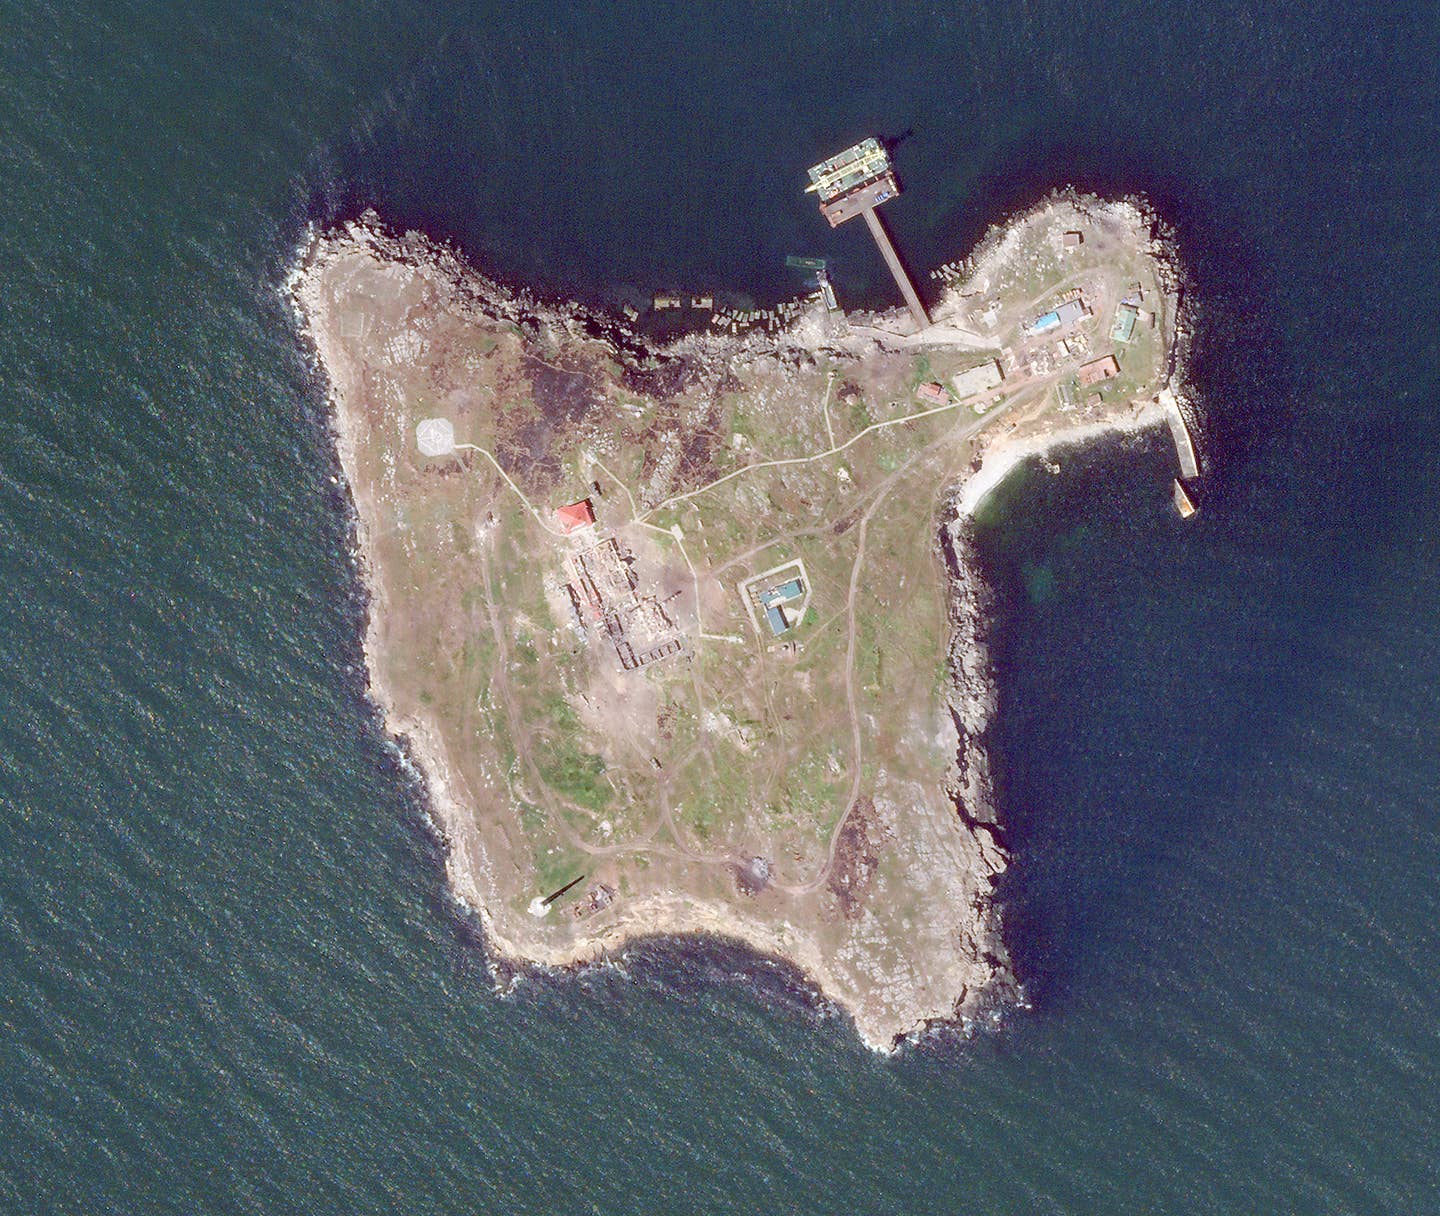 A general view of Snake Island as seen in a satellite image taken on May 12, 2022. <em>PHOTO © 2022 PLANET LABS INC. ALL RIGHTS RESERVED. REPRINTED BY PERMISSION</em>